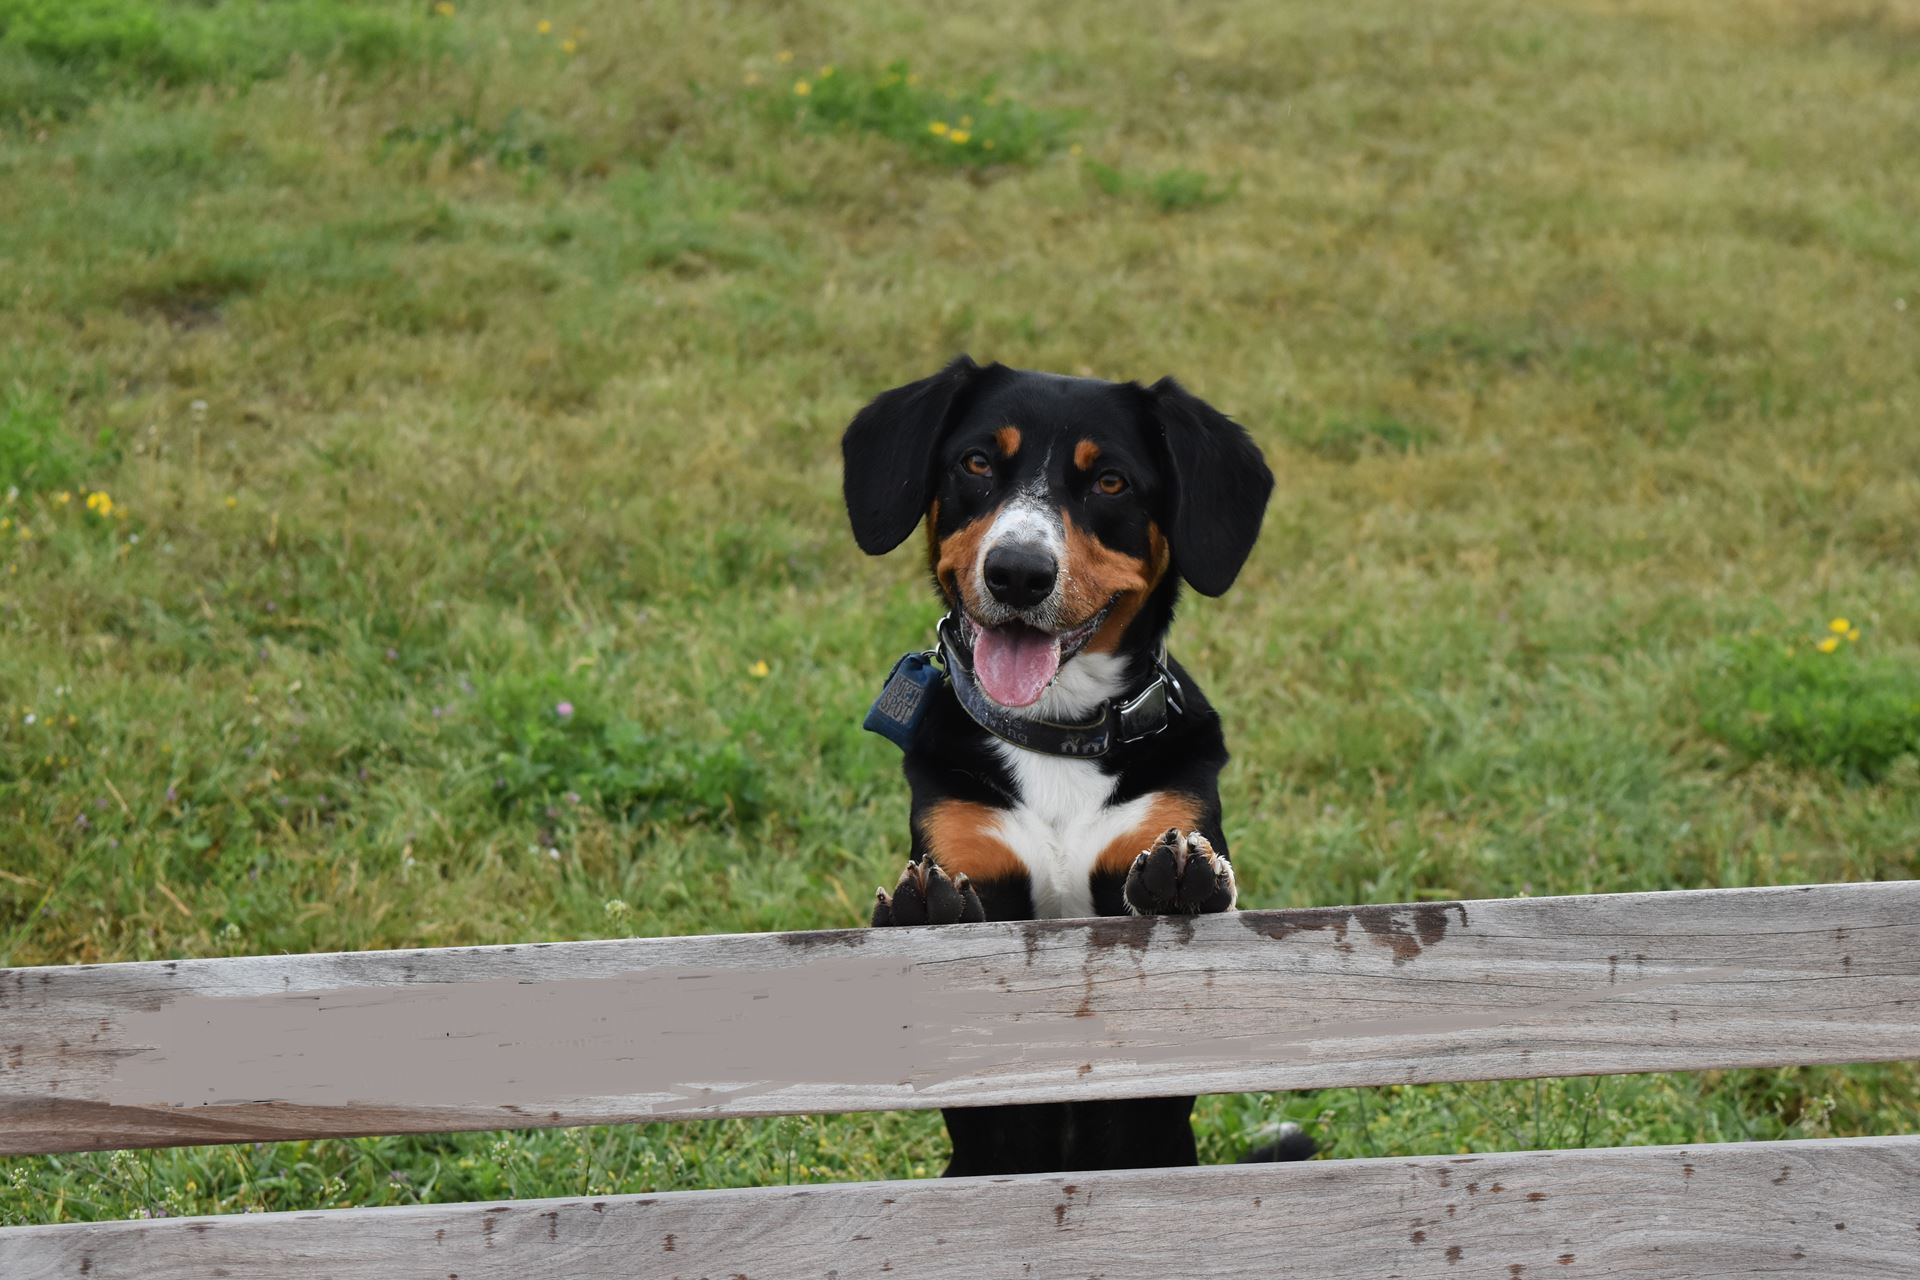 An Entlebucher named Bodhi with their paws on a fence.